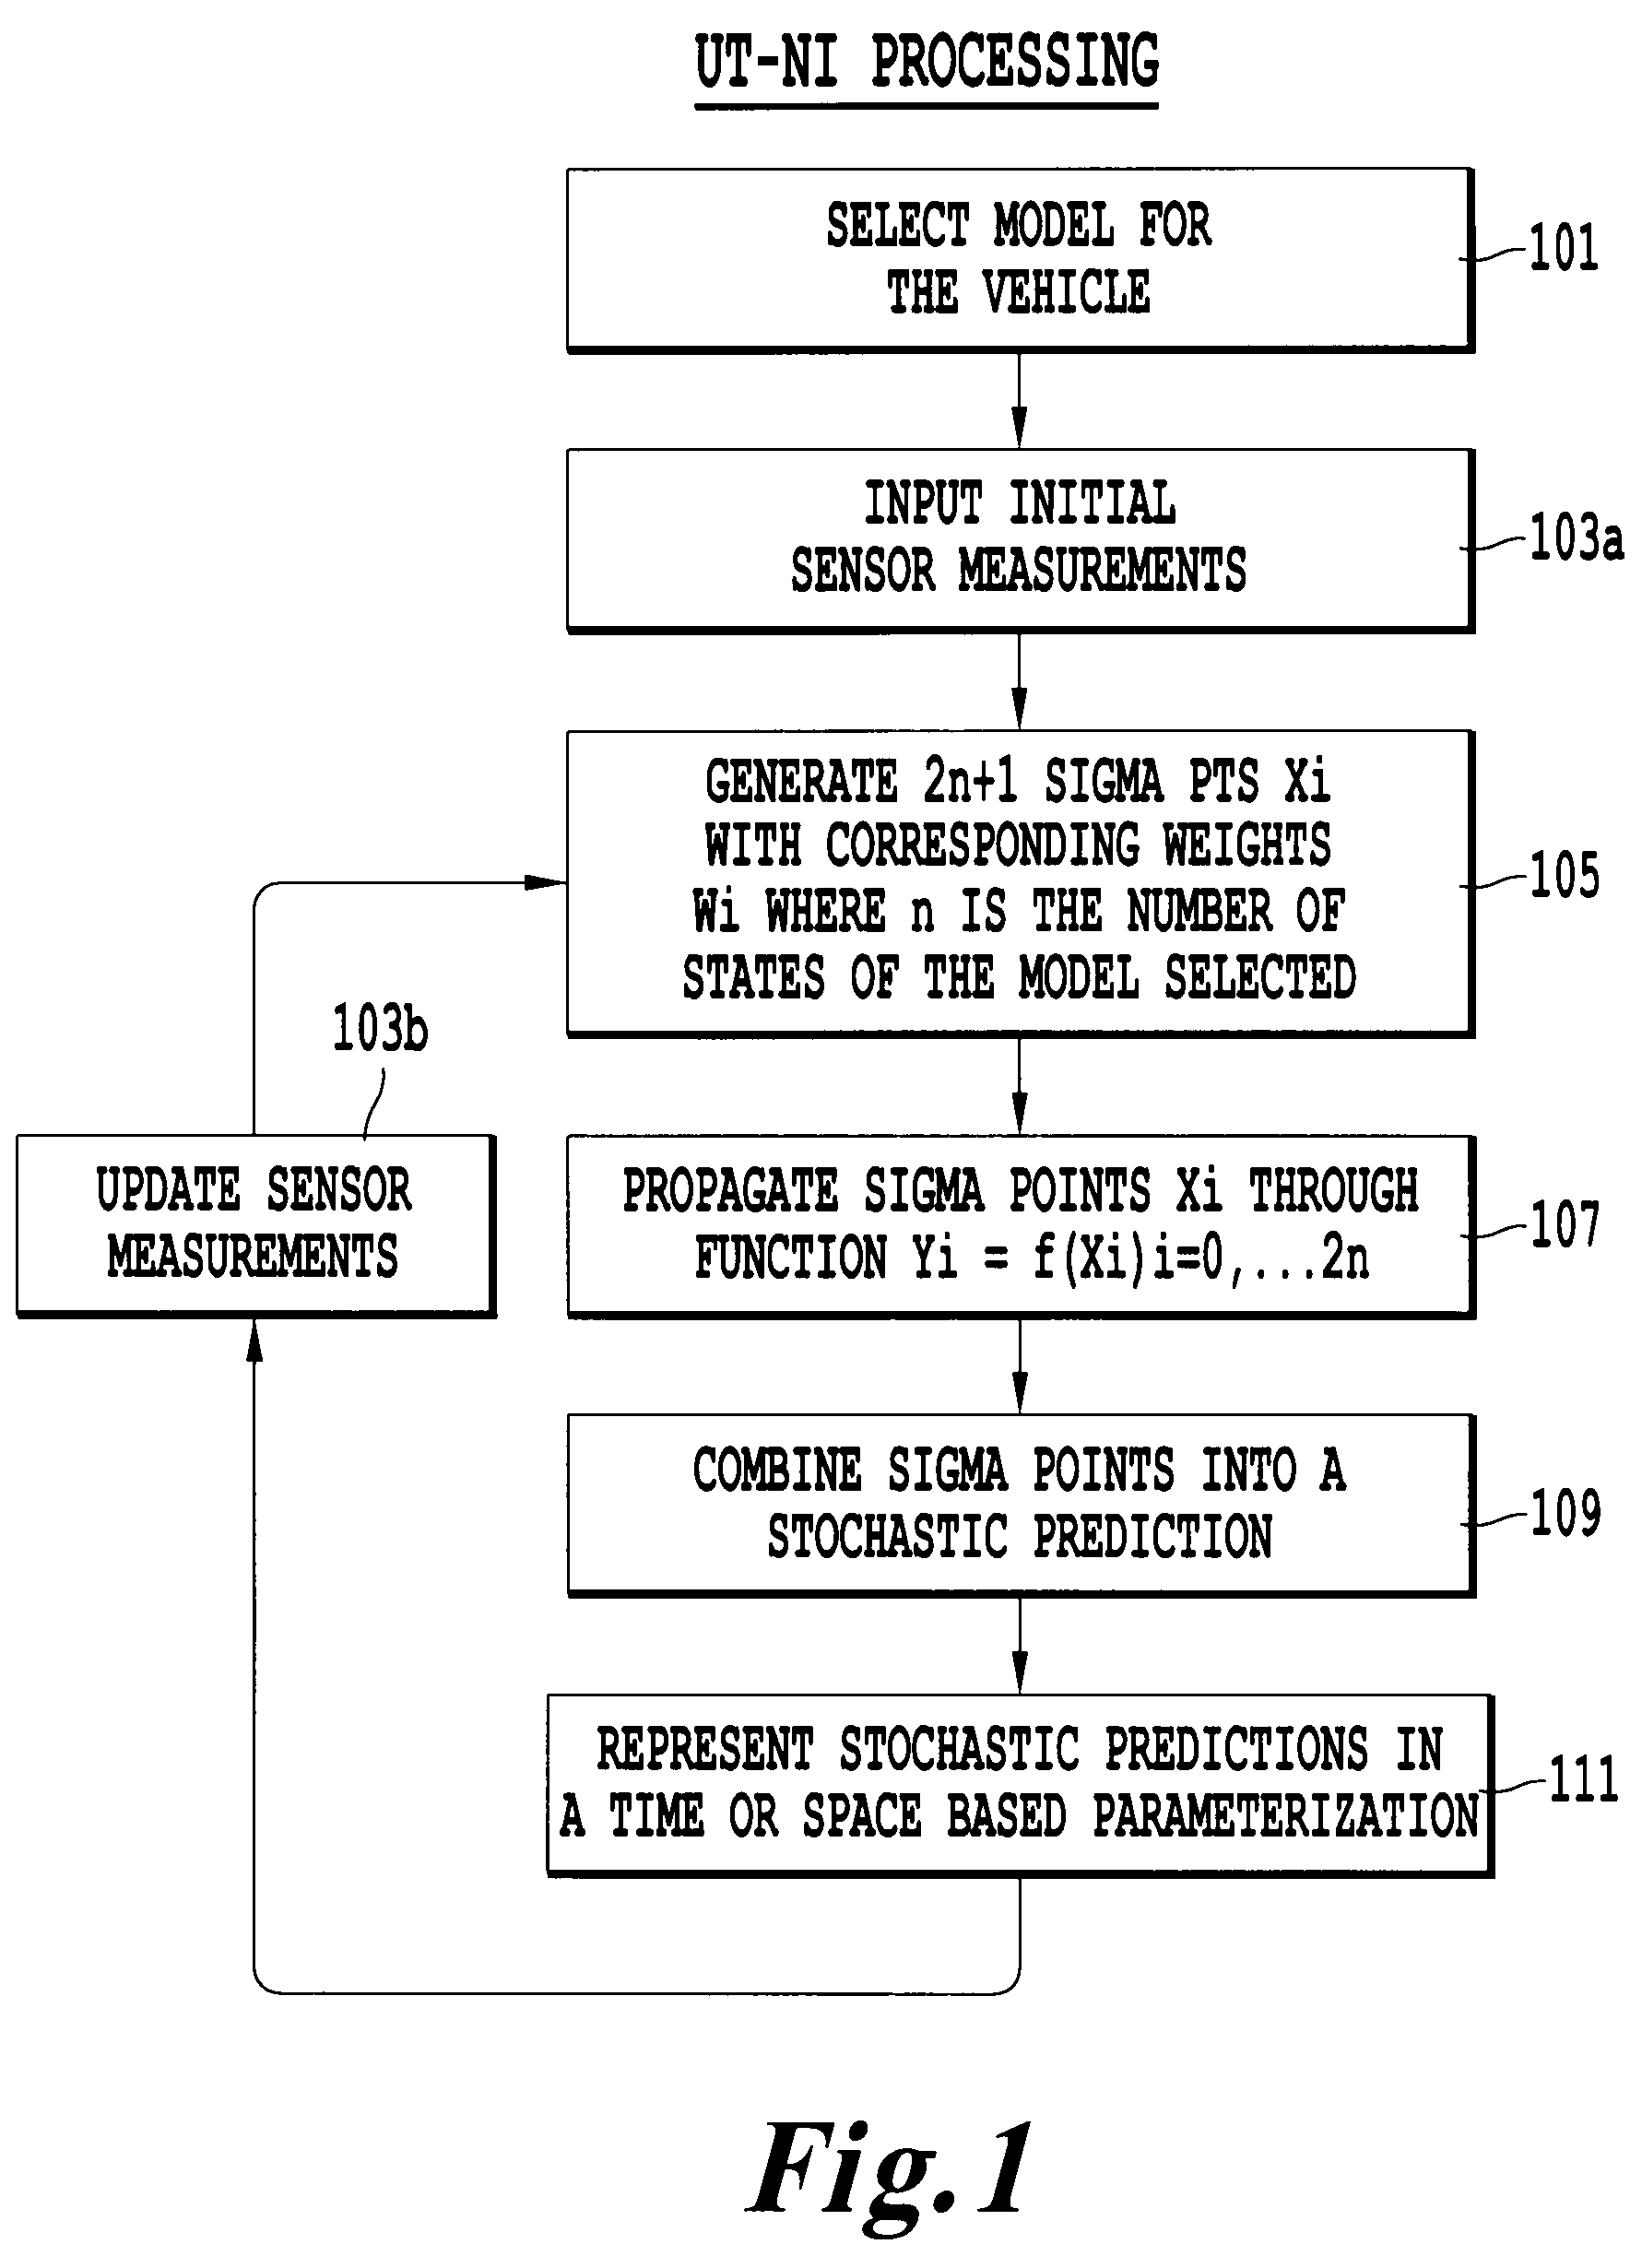 System and method for stochastically predicting the future states of a vehicle